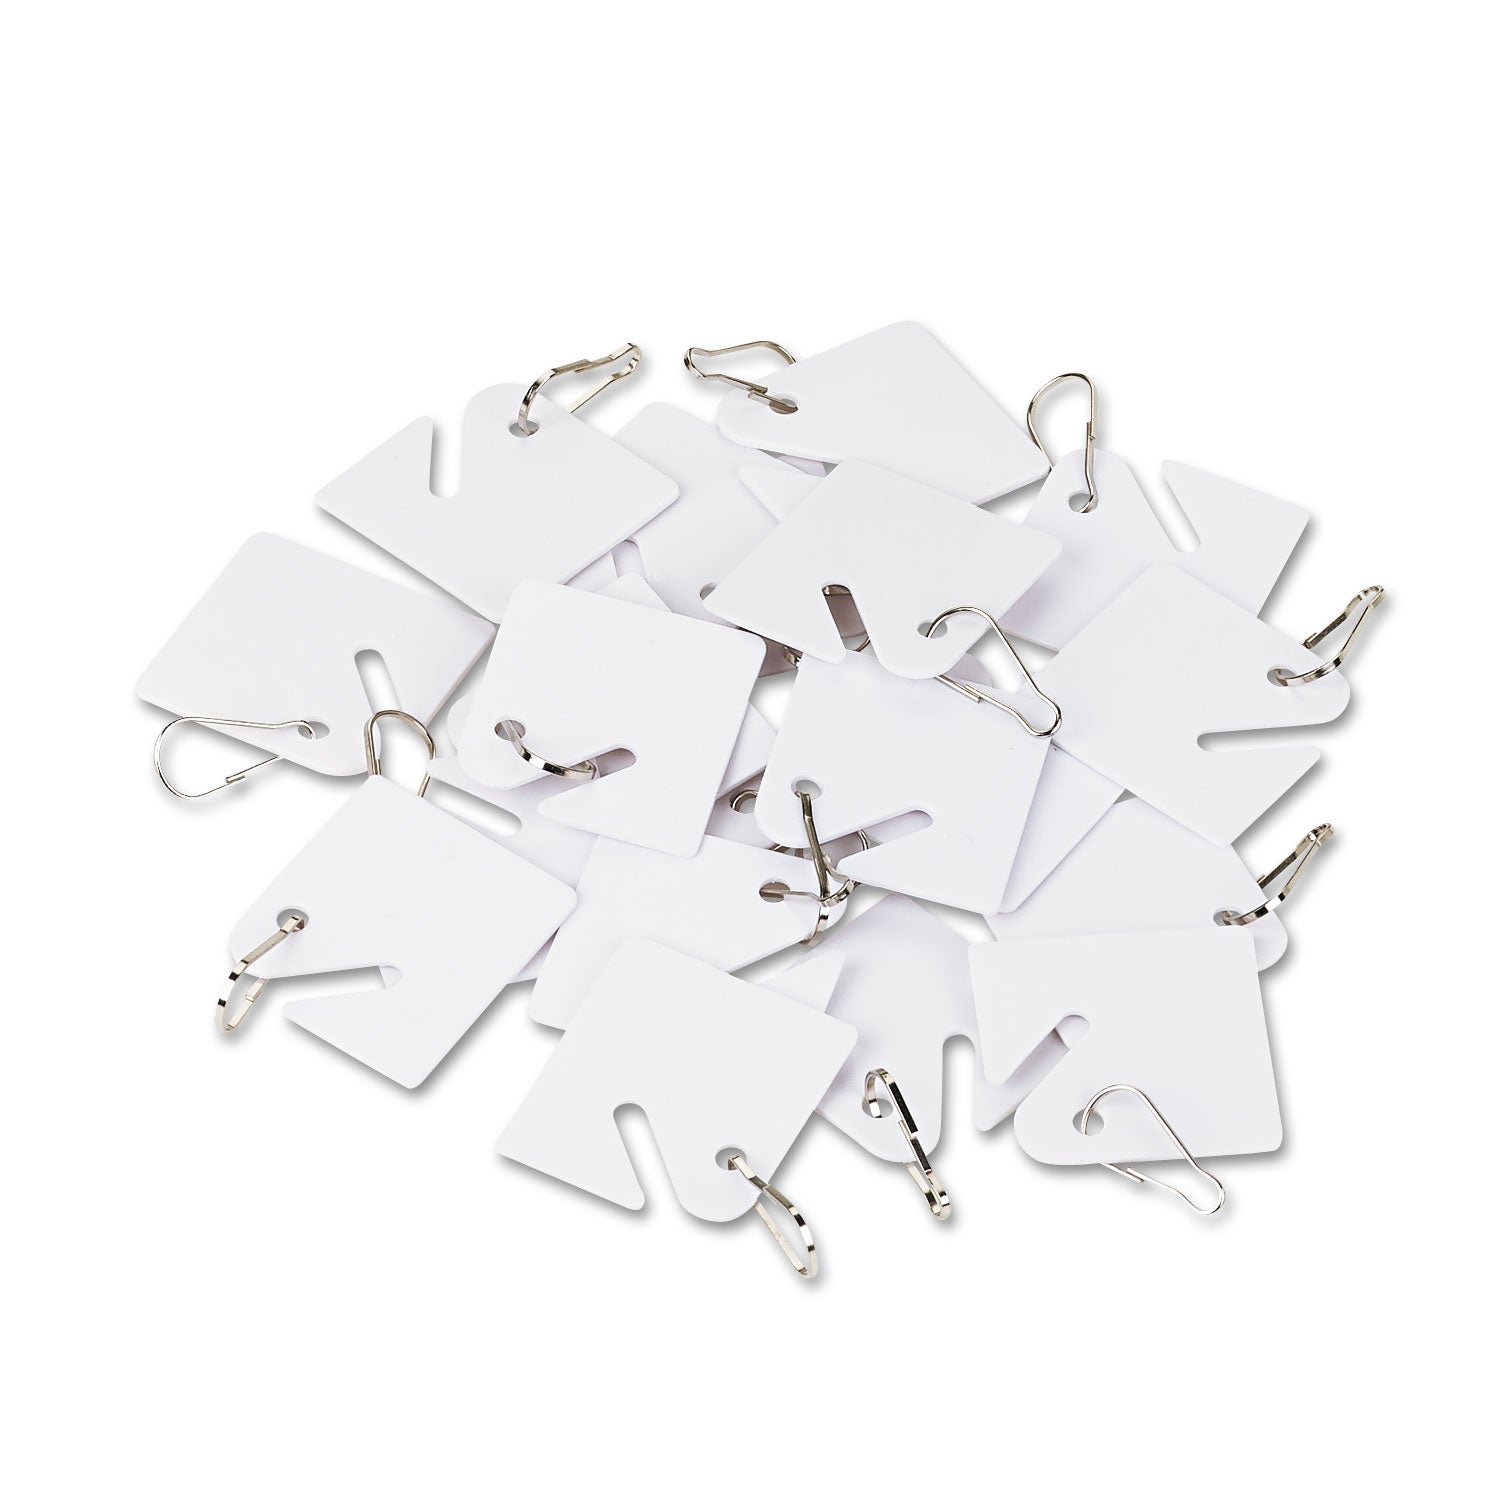 replacement-slotted-key-cabinet-tags-163-x-15-white-20-pack_icx94190027 - 1